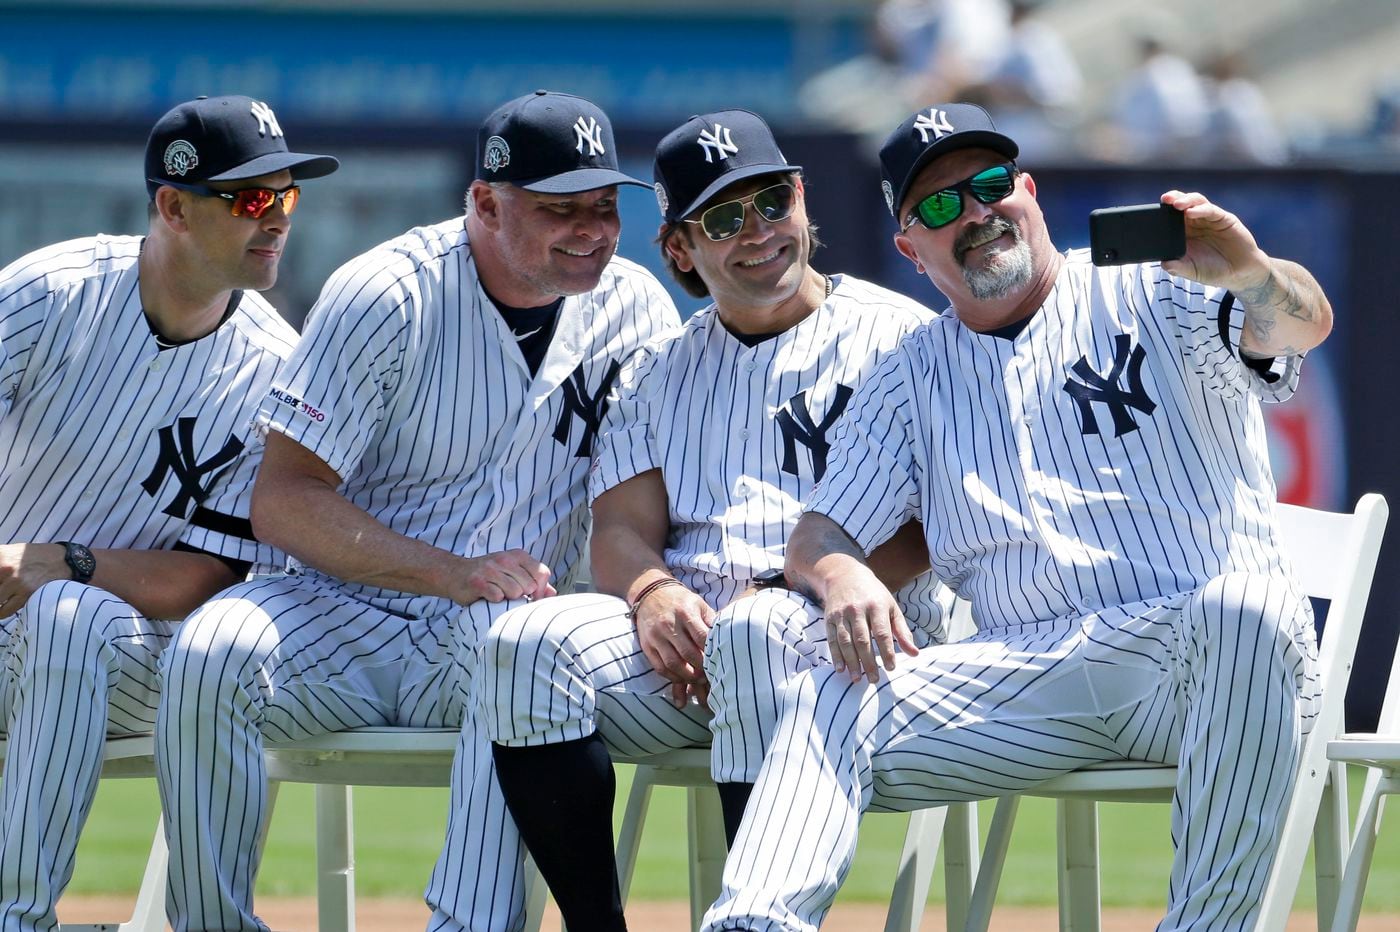 OldTimers Games, once a hit all over baseball, have almost disappeared